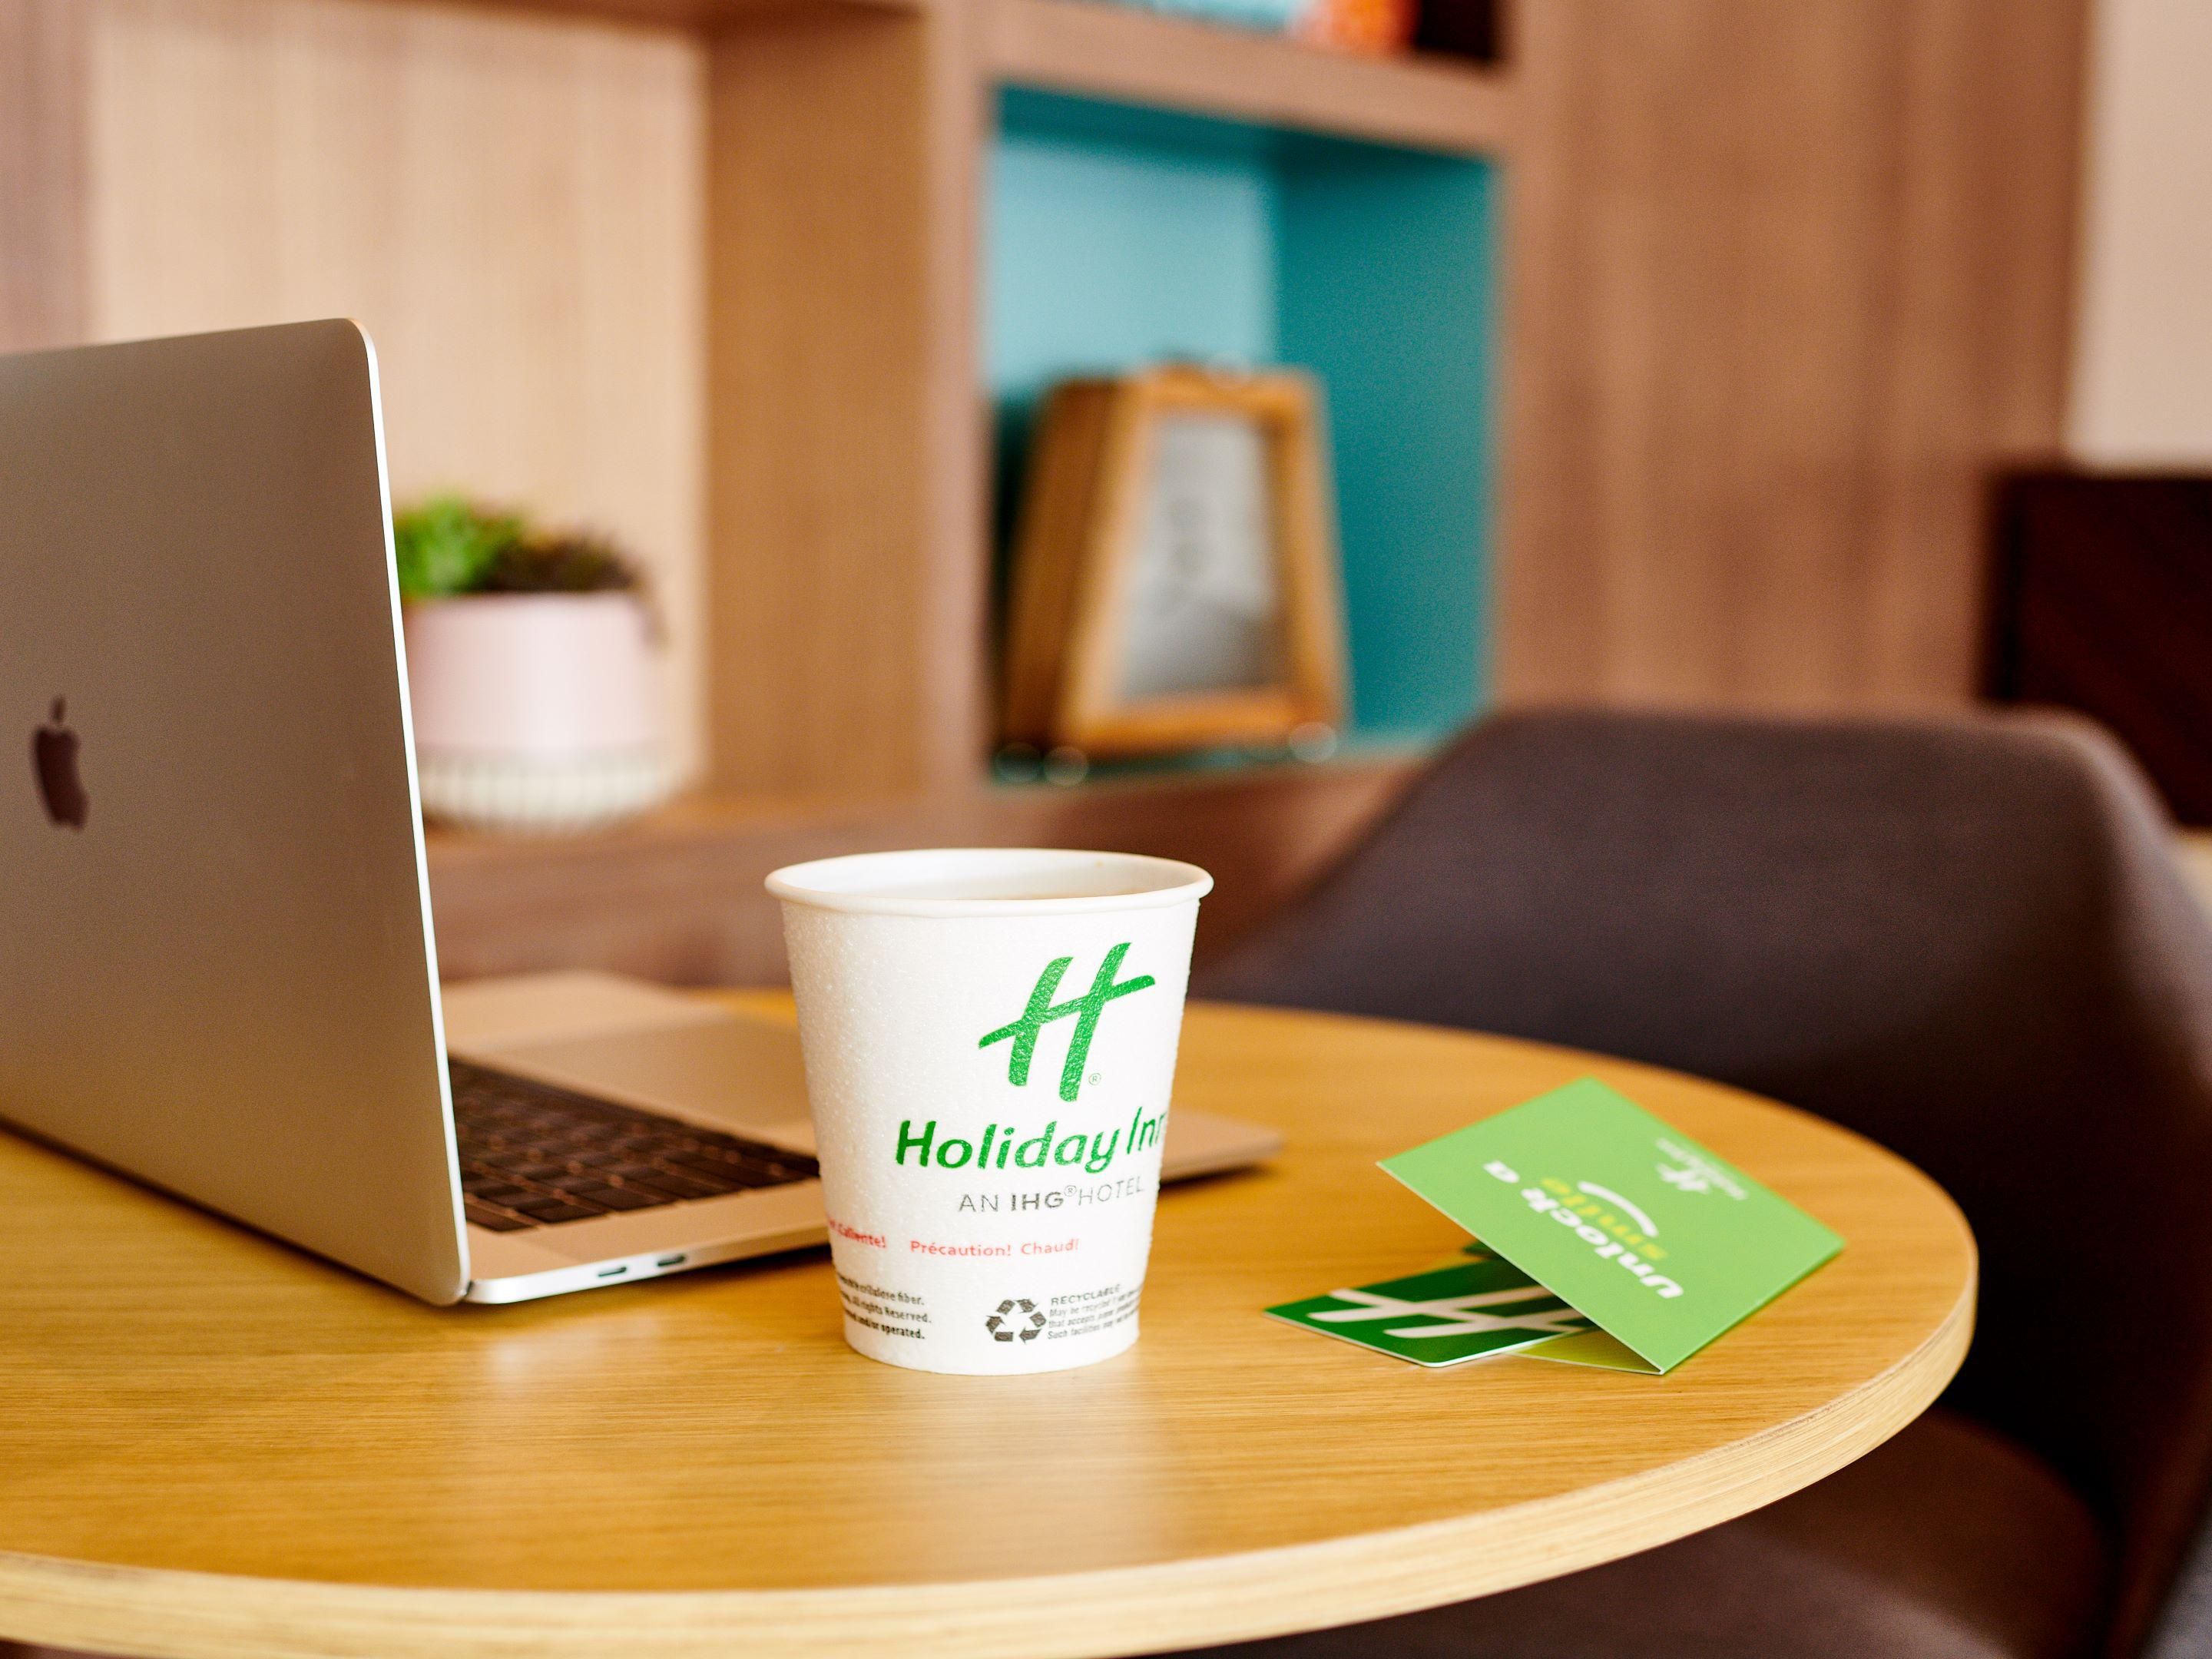 Plug into our fast, complimentary Wi-Fi to make the most of your time online -- for work or play.